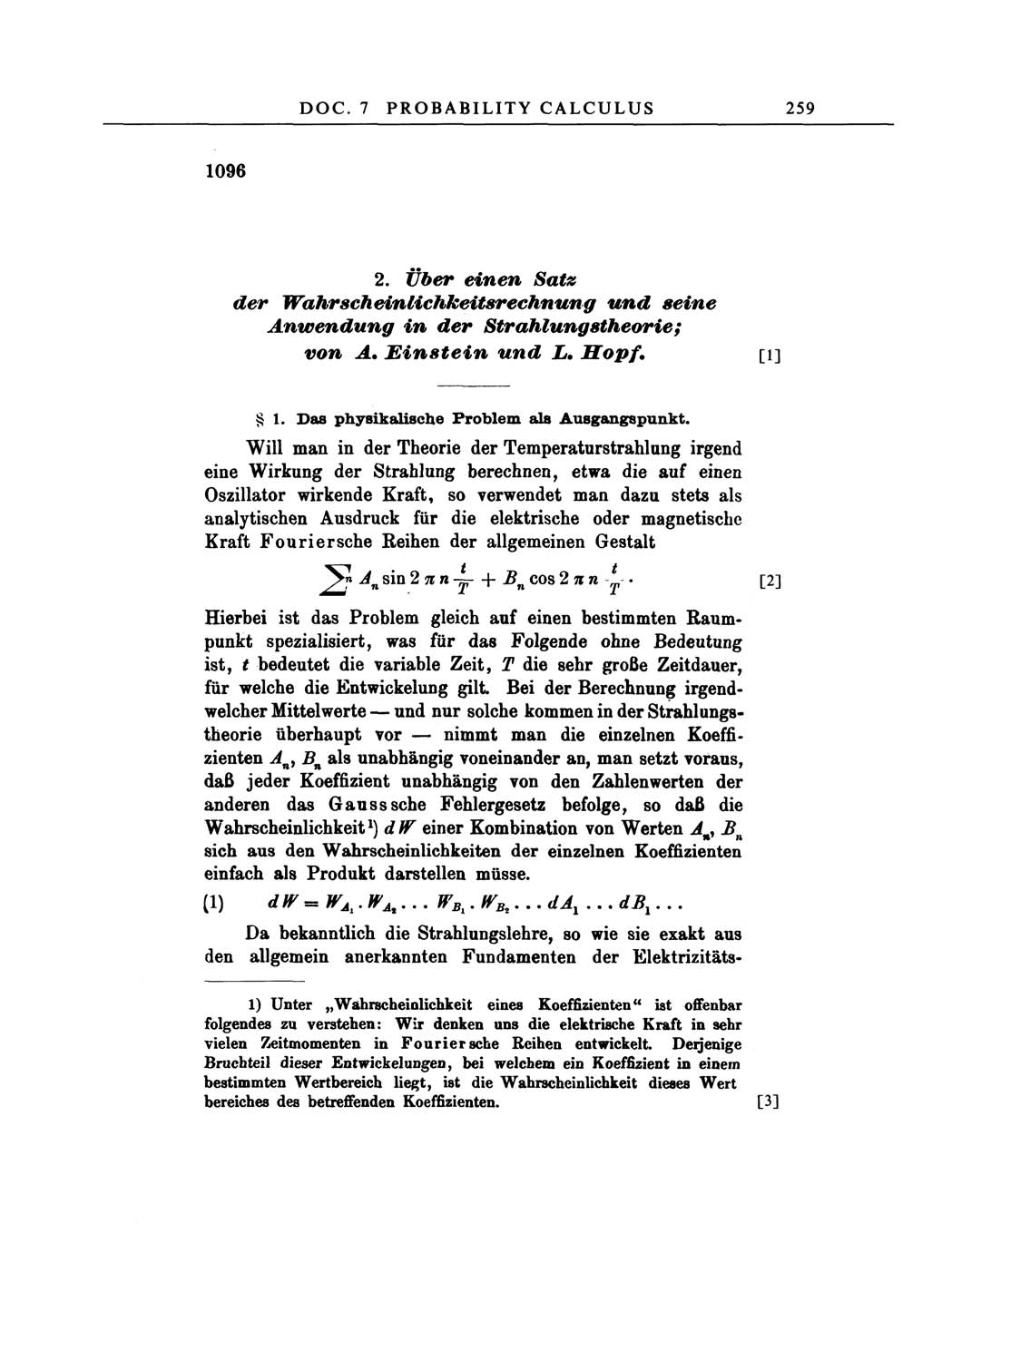 Volume 3: The Swiss Years: Writings 1909-1911 page 259